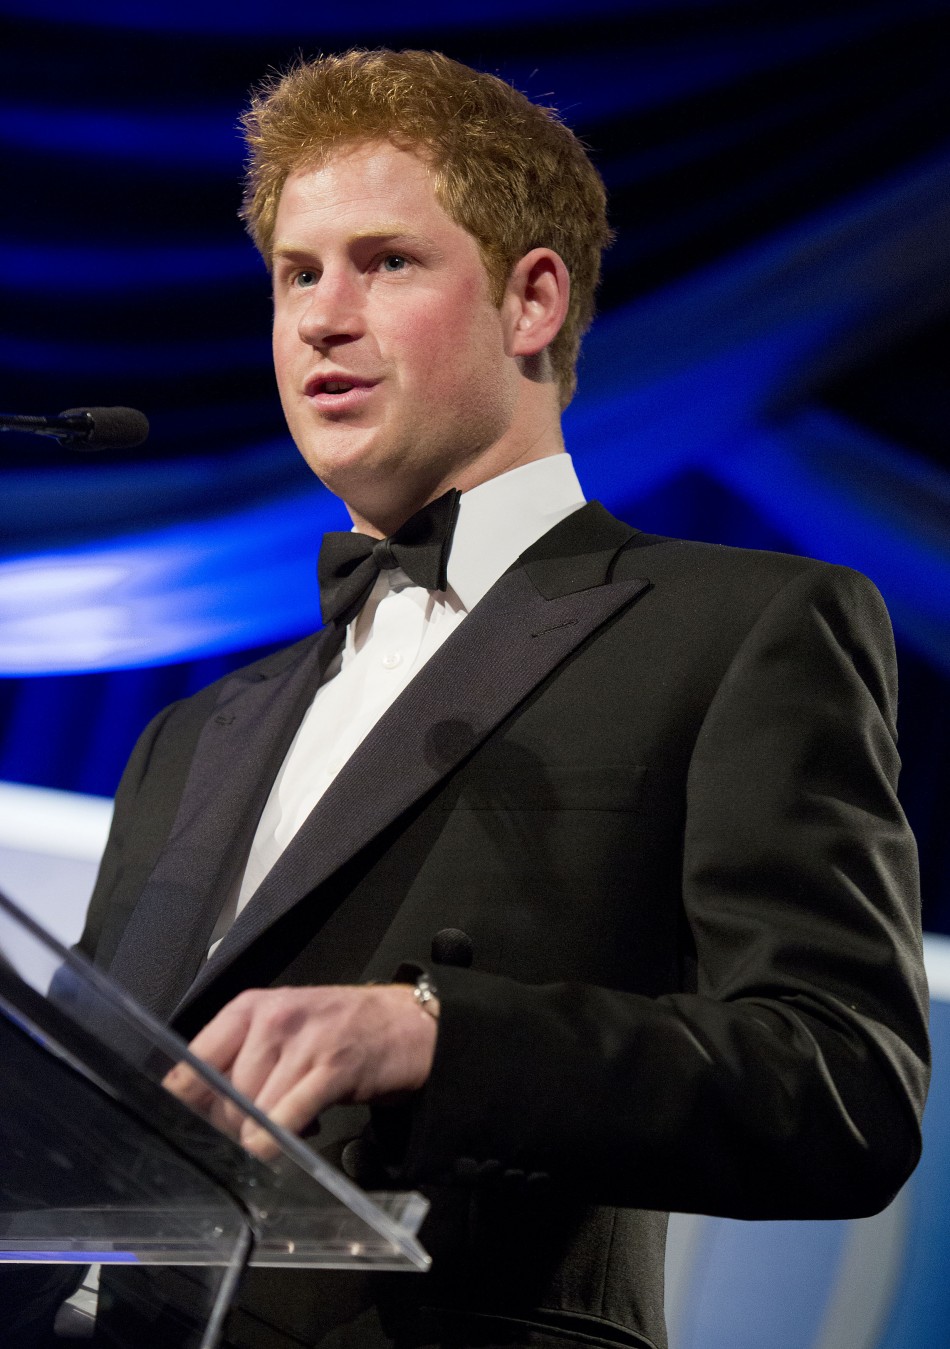 Prince Harry Honoured with Distinguished Leadership Award by Atlantic Council